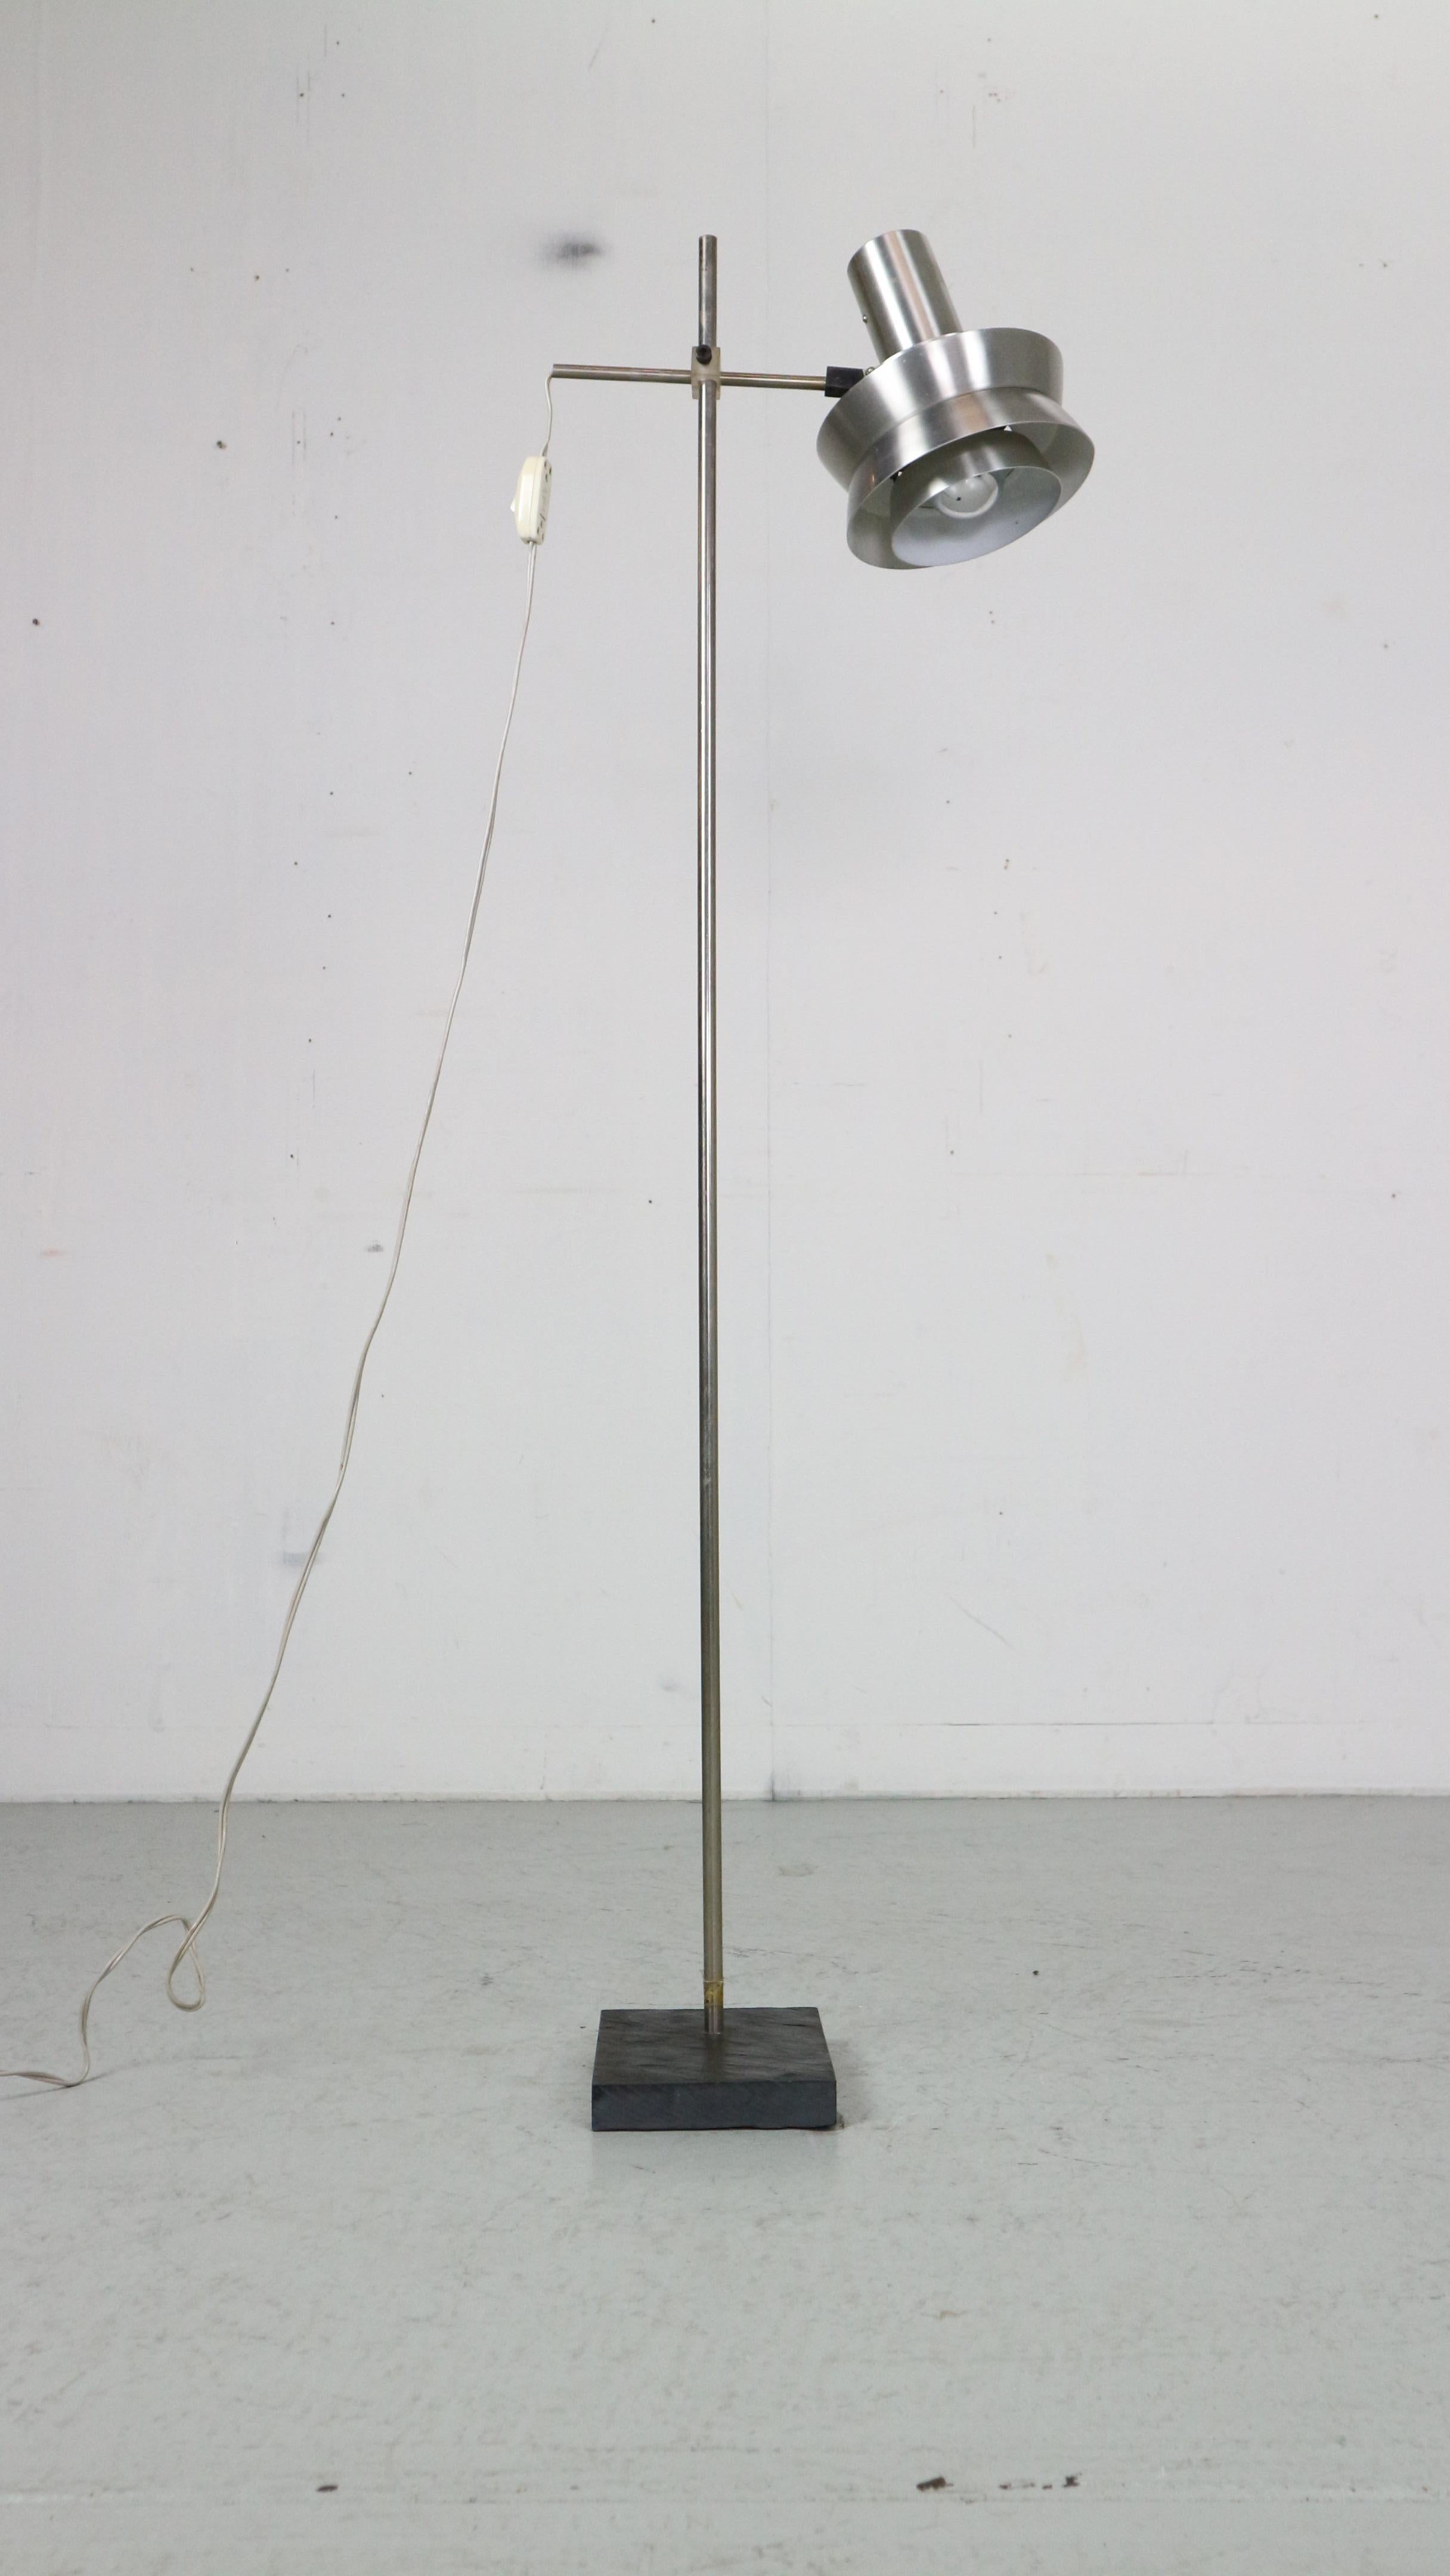 Scandinavian modern period floor lamp designed in 1970's period, Denmark.

Chrome metal lamp shade is in two colours- silver and red and has an on/off button.
You can adjust the lamp shade's high and direction.
The light standing on a stone